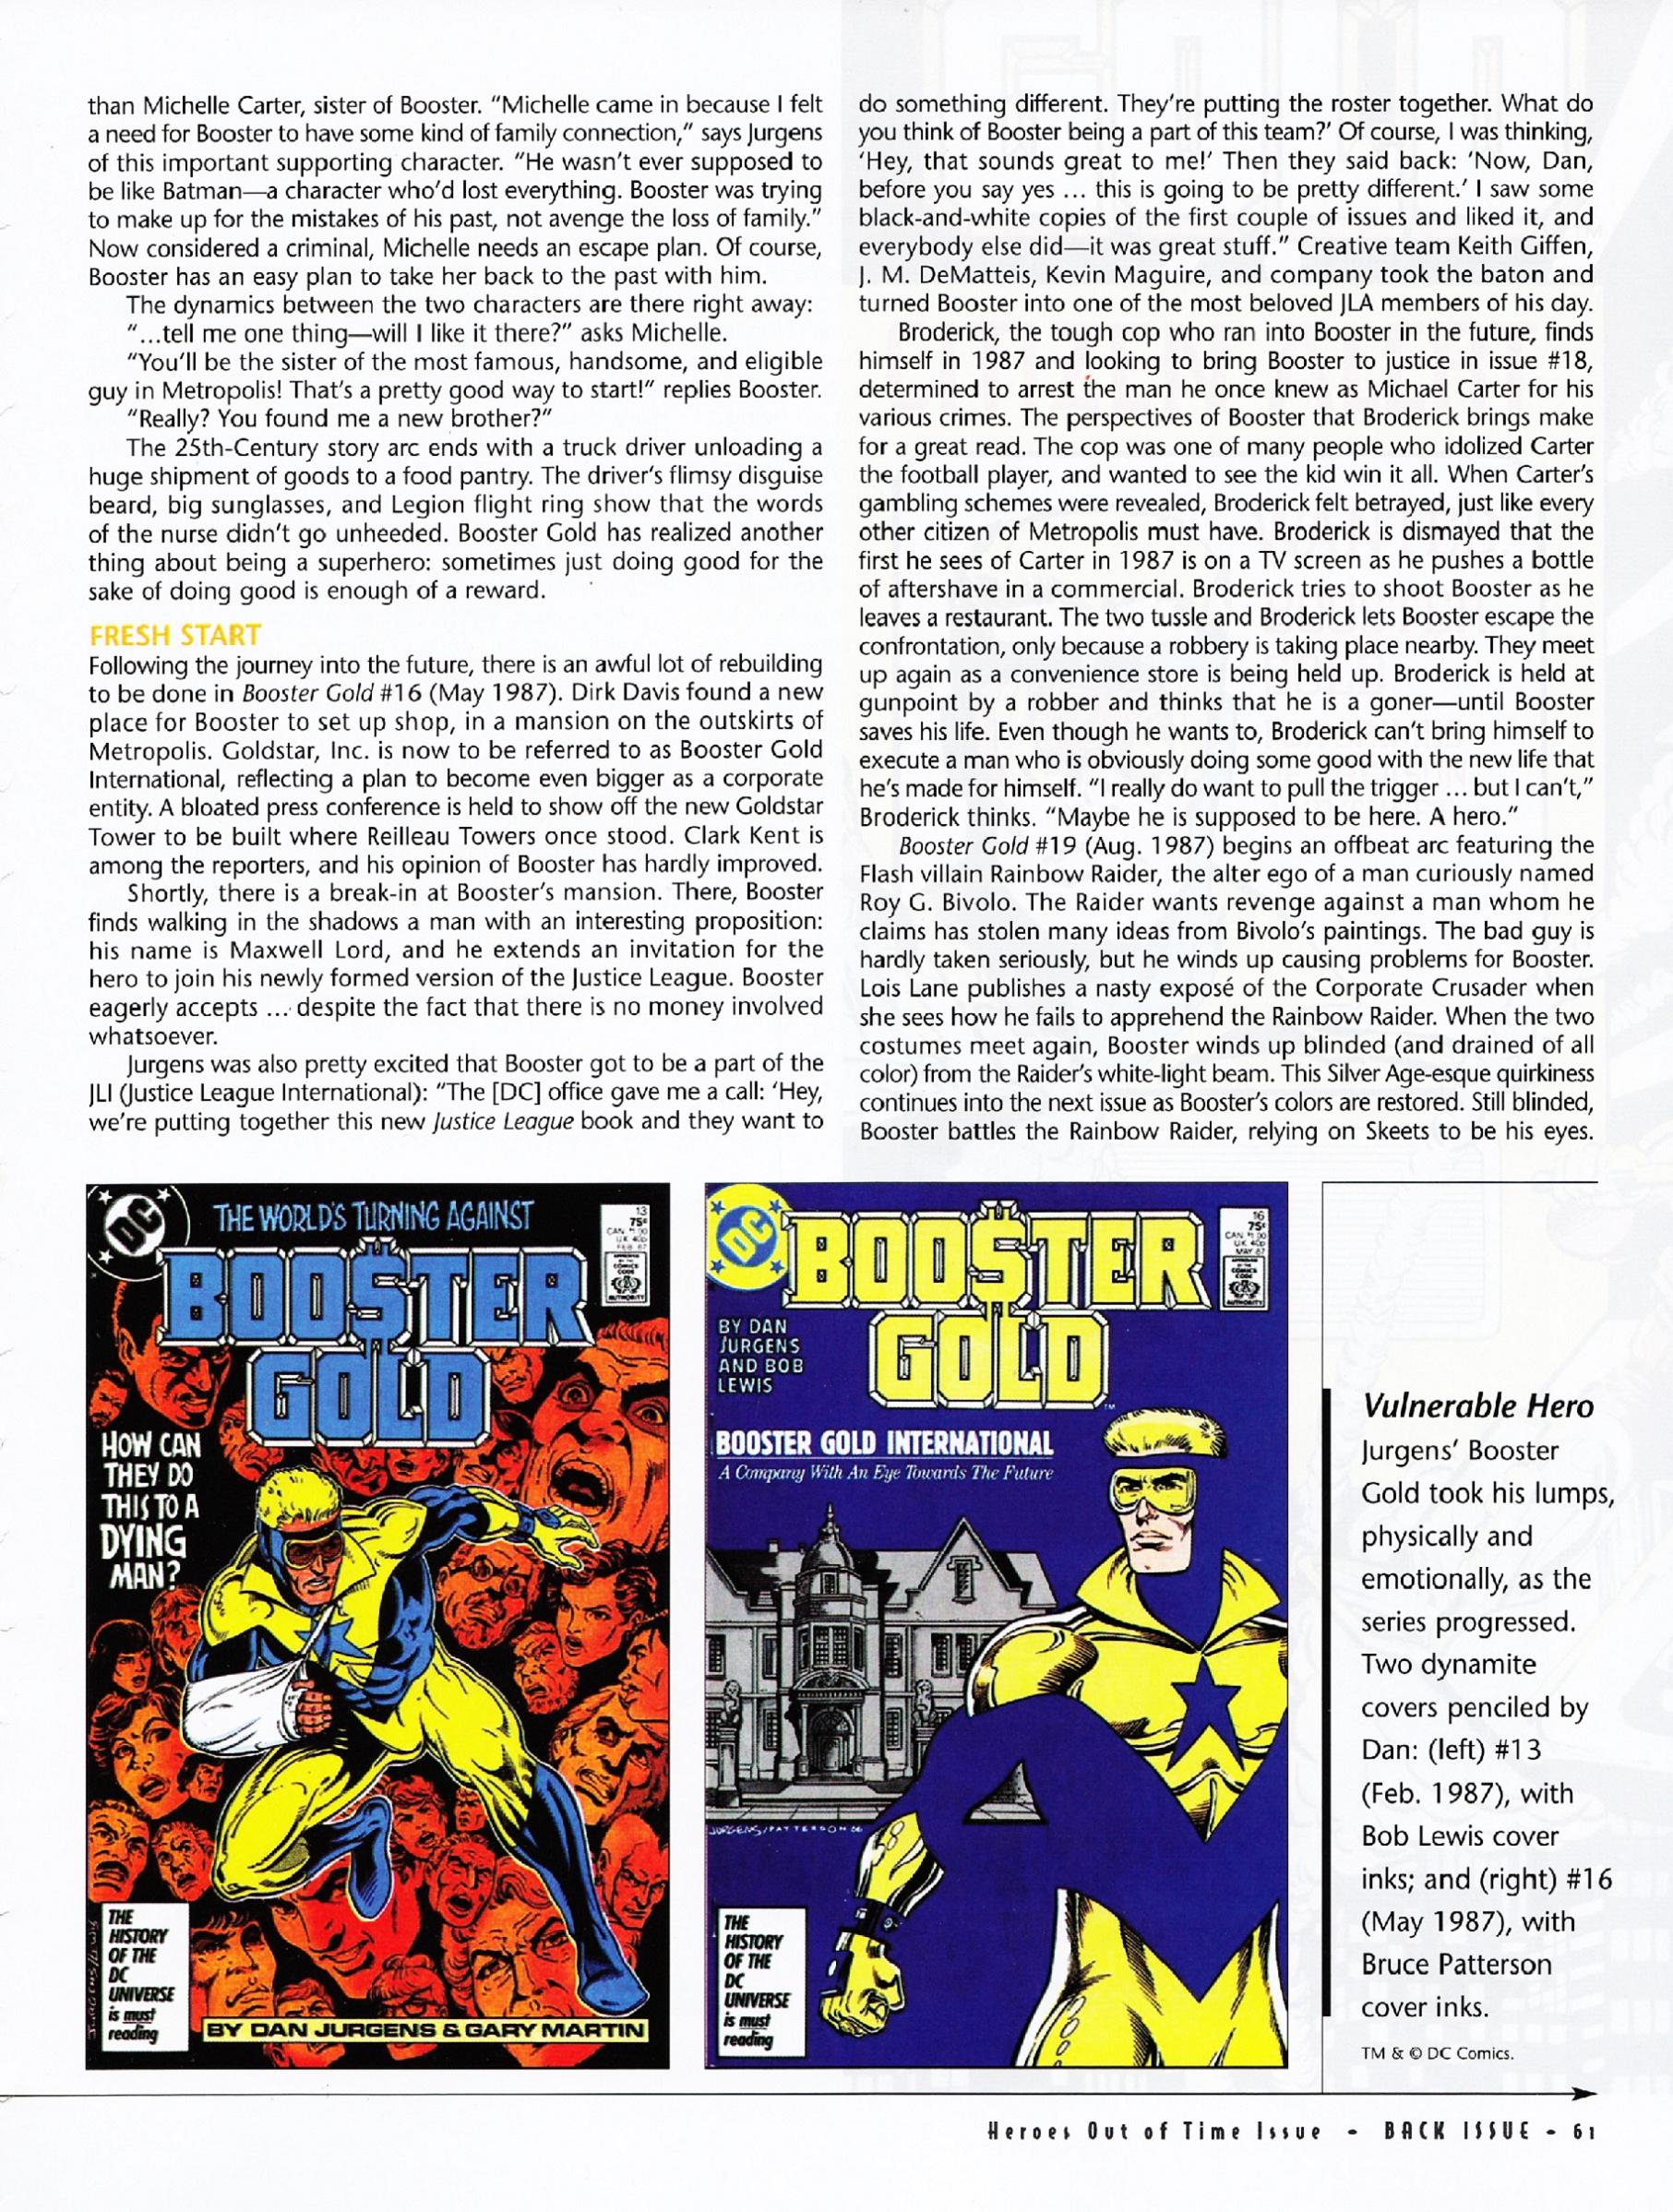 Read online Back Issue comic -  Issue #67 - 63